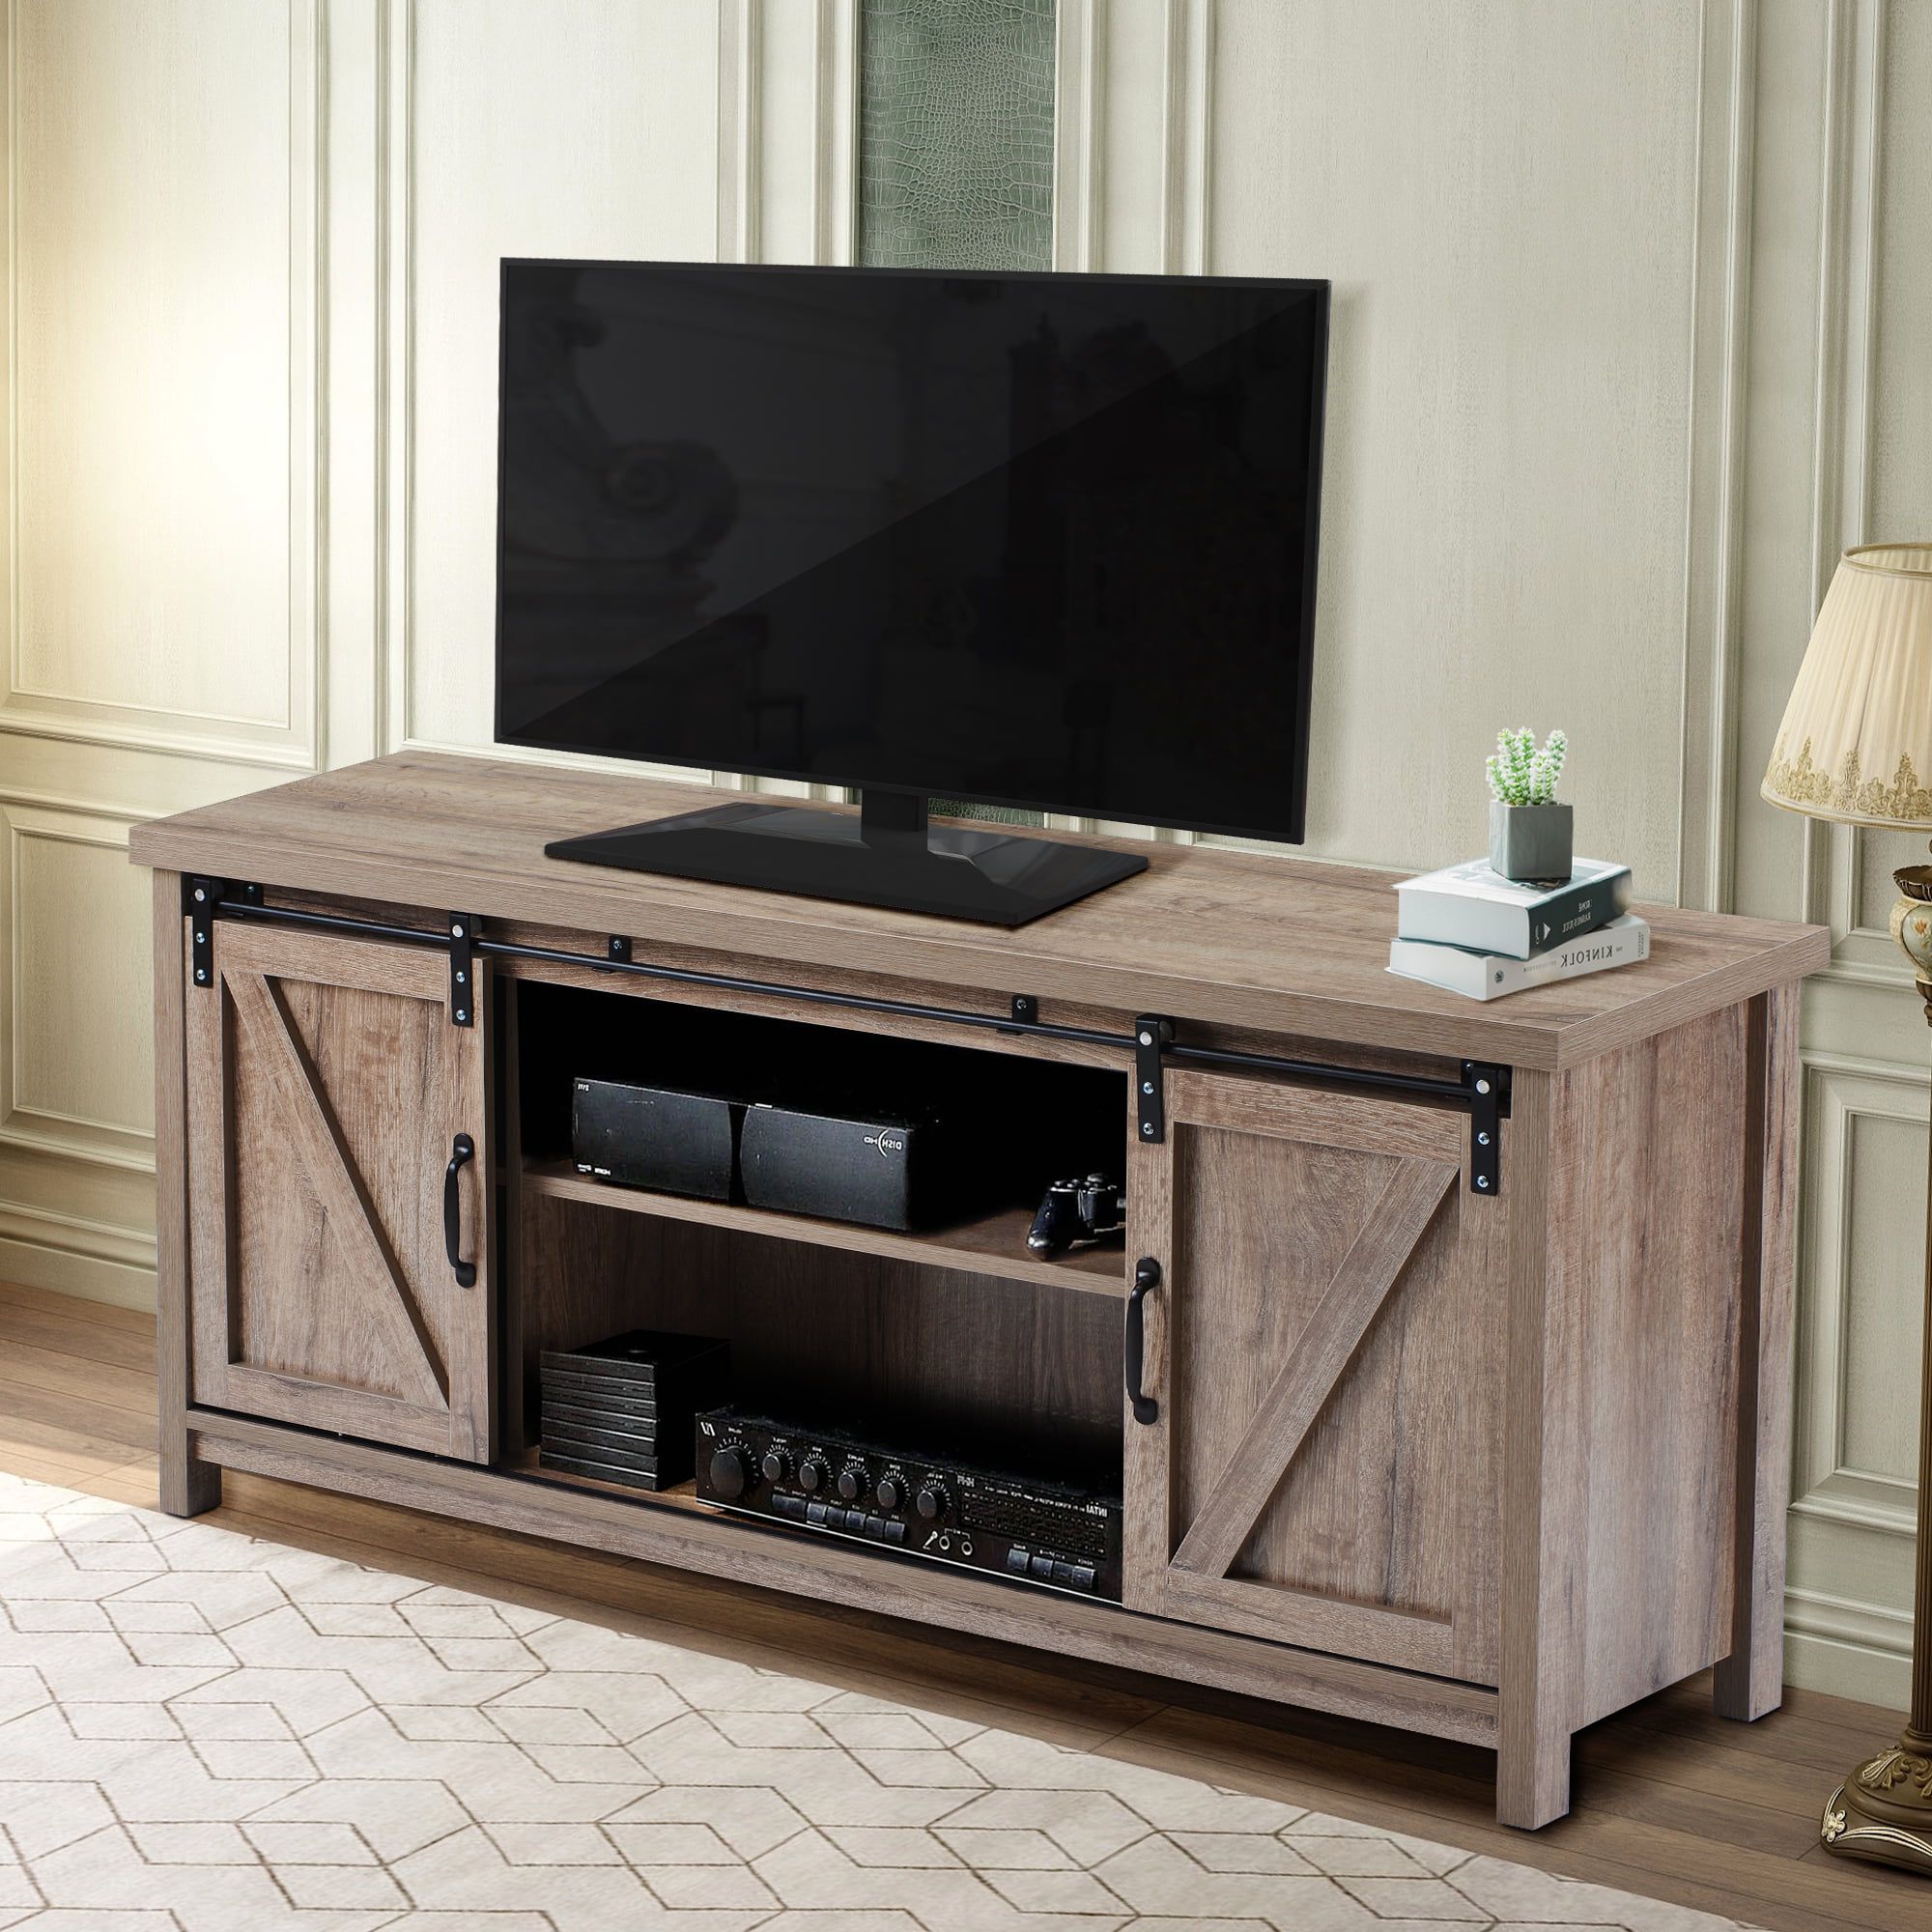 110" Tvs Wood Tv Cabinet With Drawers Intended For Widely Used Tv Cabinet With Shelves, Farmhouse Tv Stand For Tvs Up To 50", Sliding (View 2 of 15)